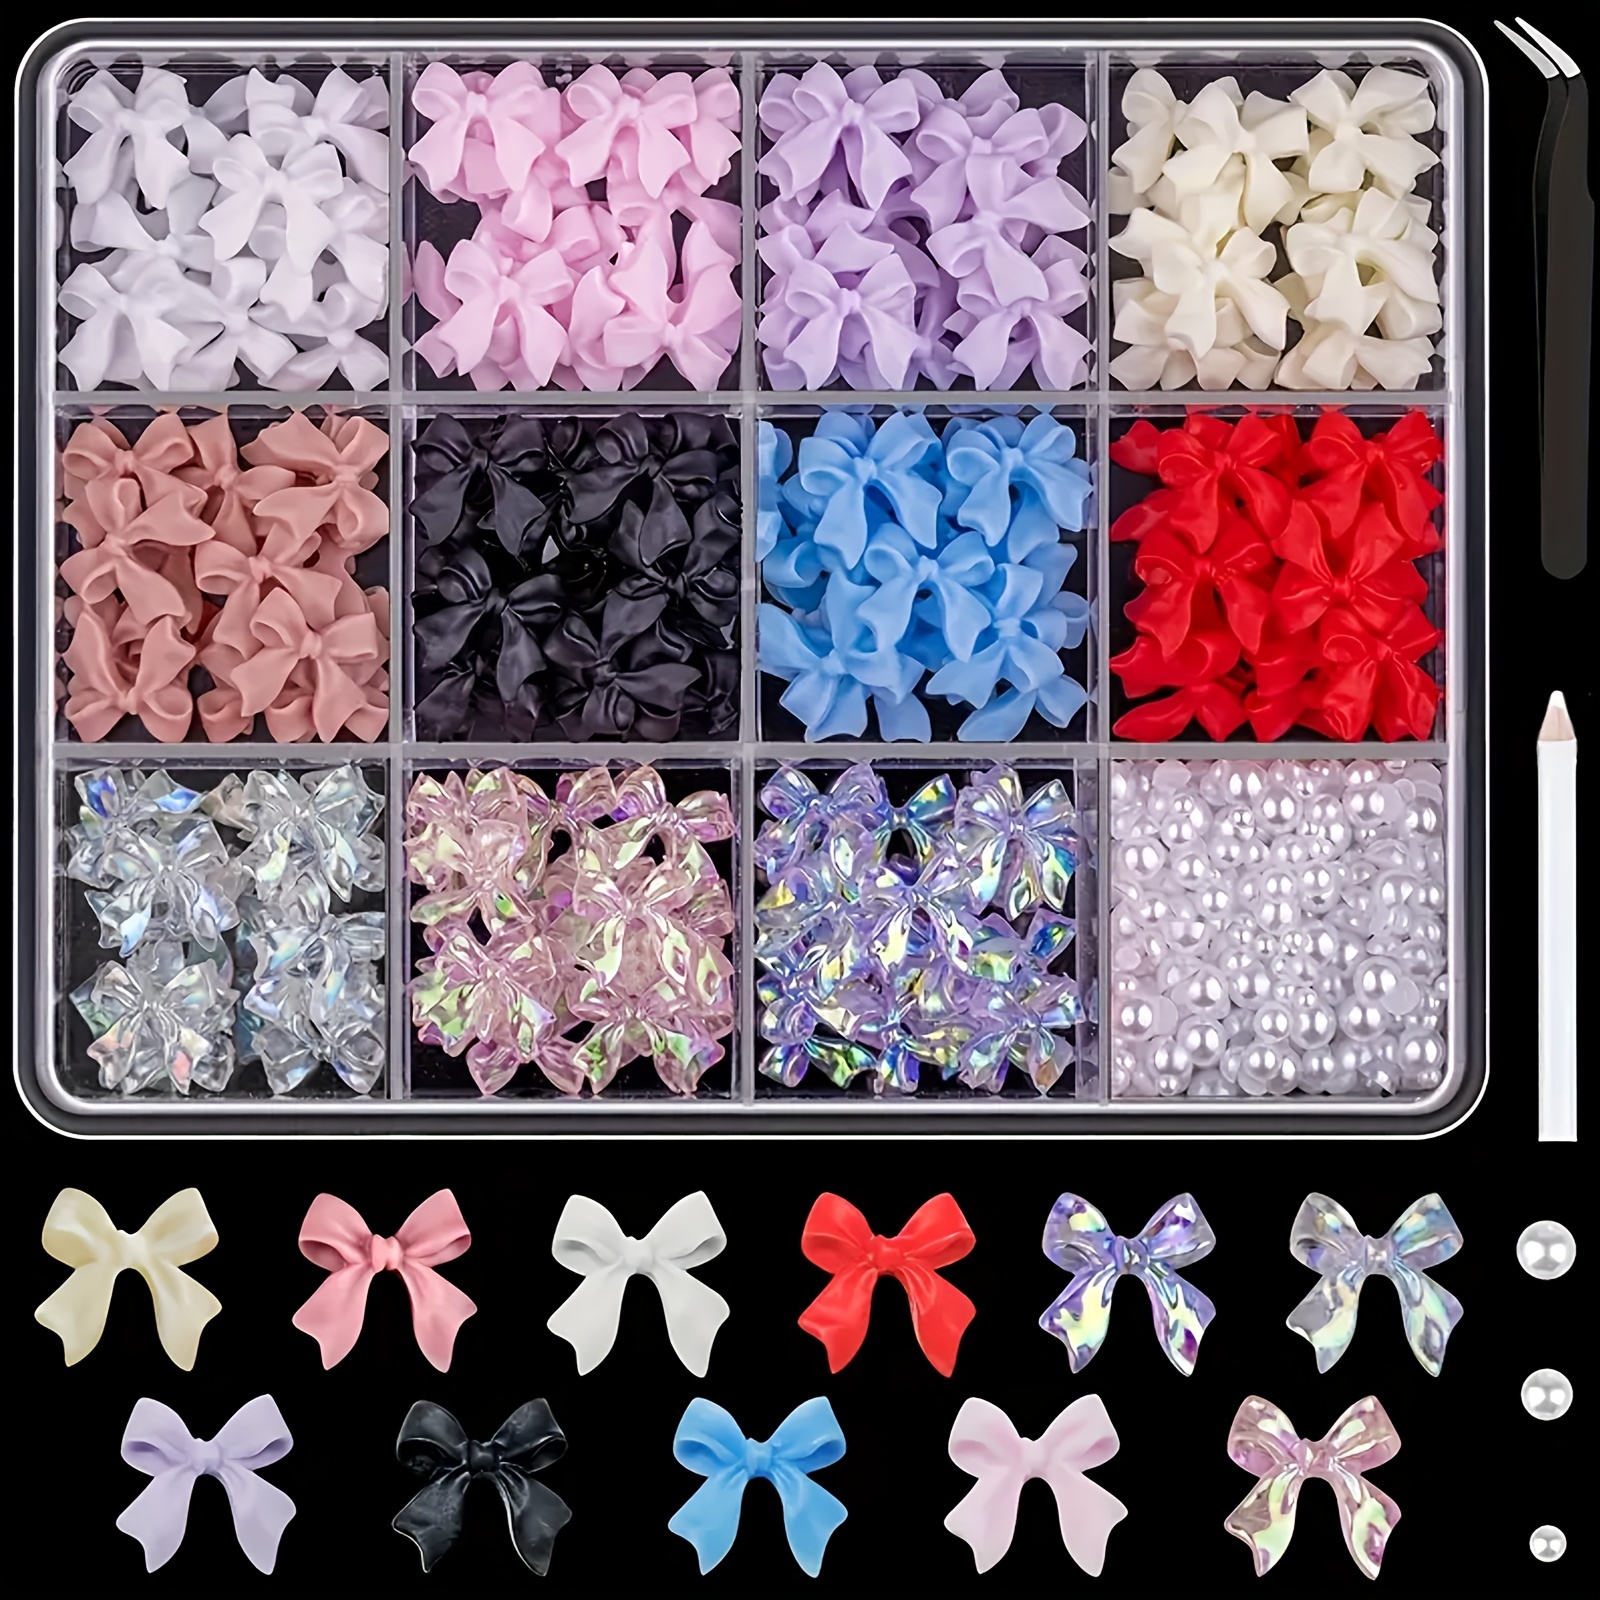 

500 Pcs 3d Nail Charms And Flatback Pearls Multi Styles Bowknot Charms + Pink&white Star Heart Nail Jewels + 2-6mm White Nail Pearls For Nail Art Design With Pickup Tools